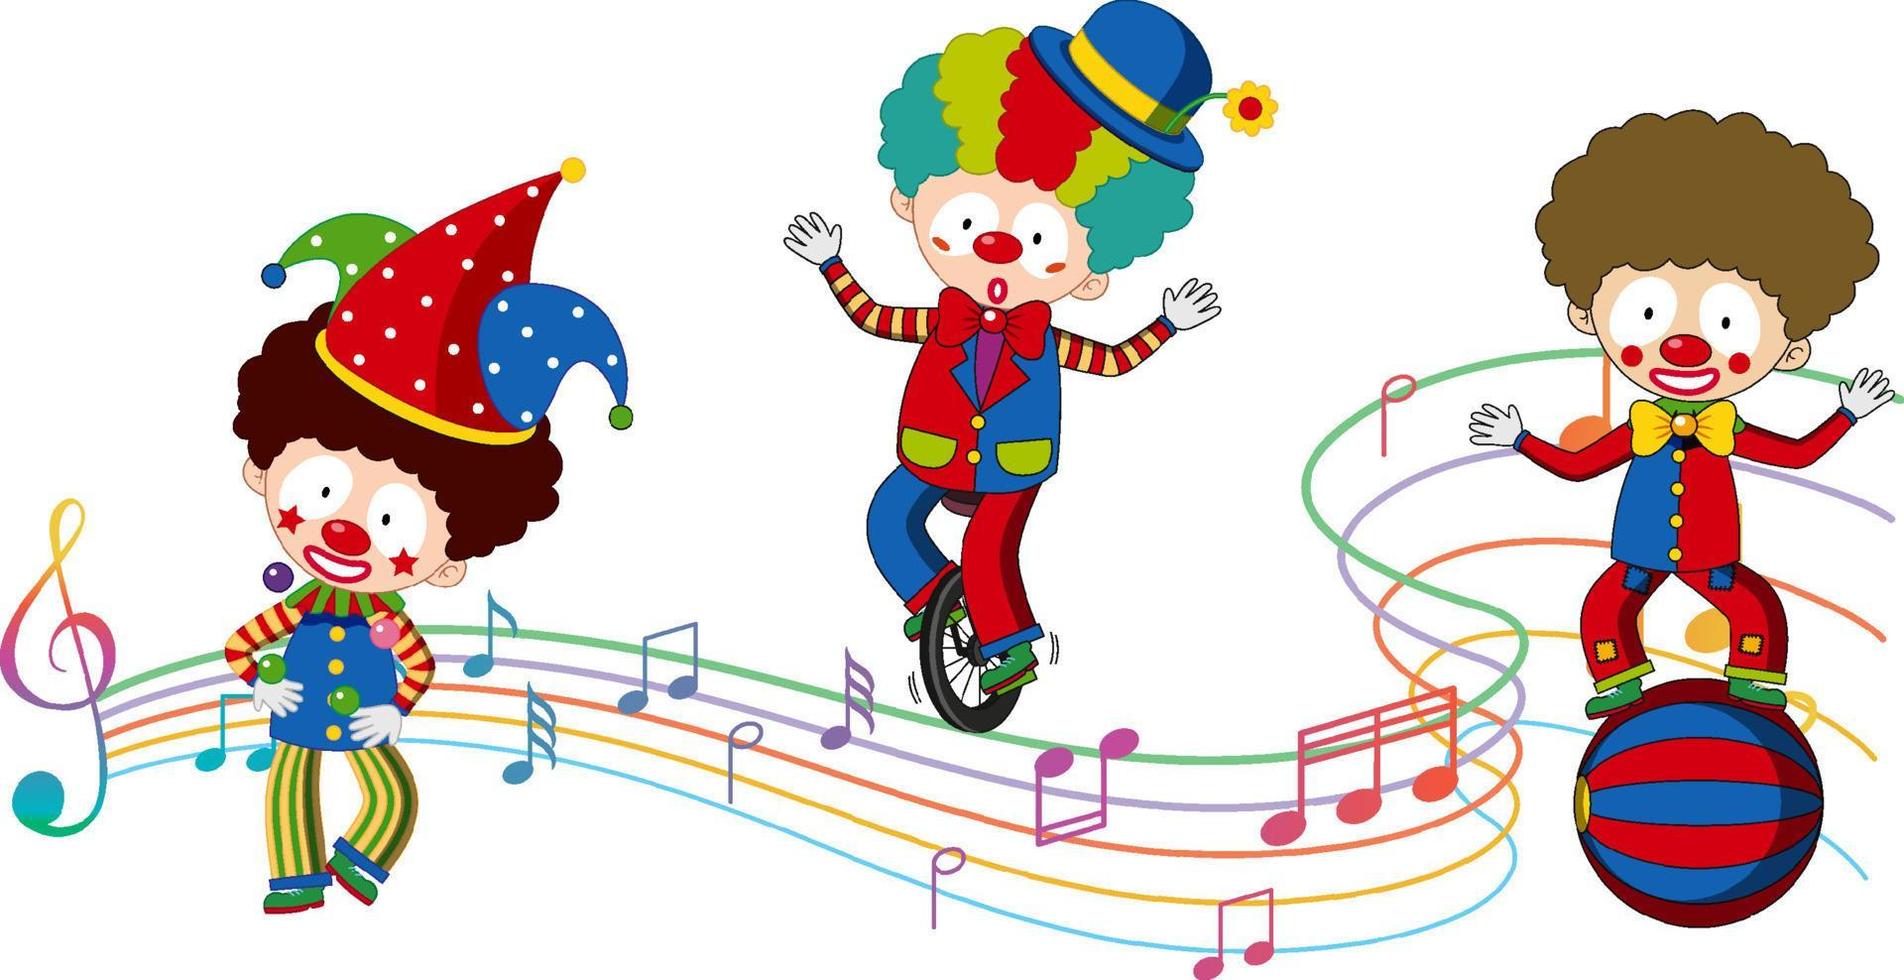 Clown with music note performing vector